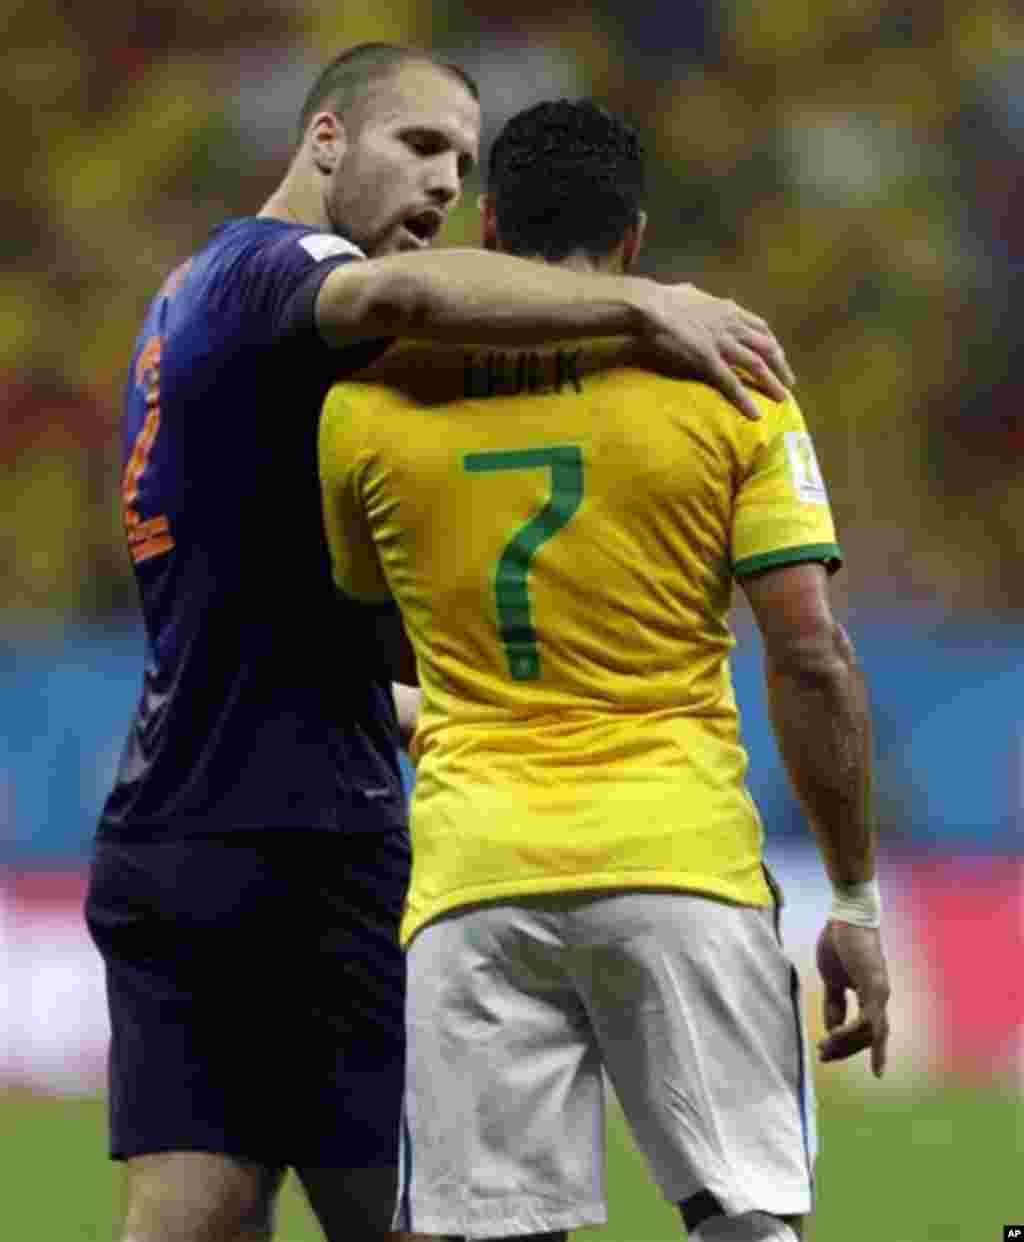 Netherlands' Ron Vlaar talks with Brazil's Hulk during the World Cup third-place soccer match between Brazil and the Netherlands at the Estadio Nacional in Brasilia, Brazil, Saturday, July 12, 2014. The Netherlands defeated Brazil 3-0. (AP Photo/Andre Pe